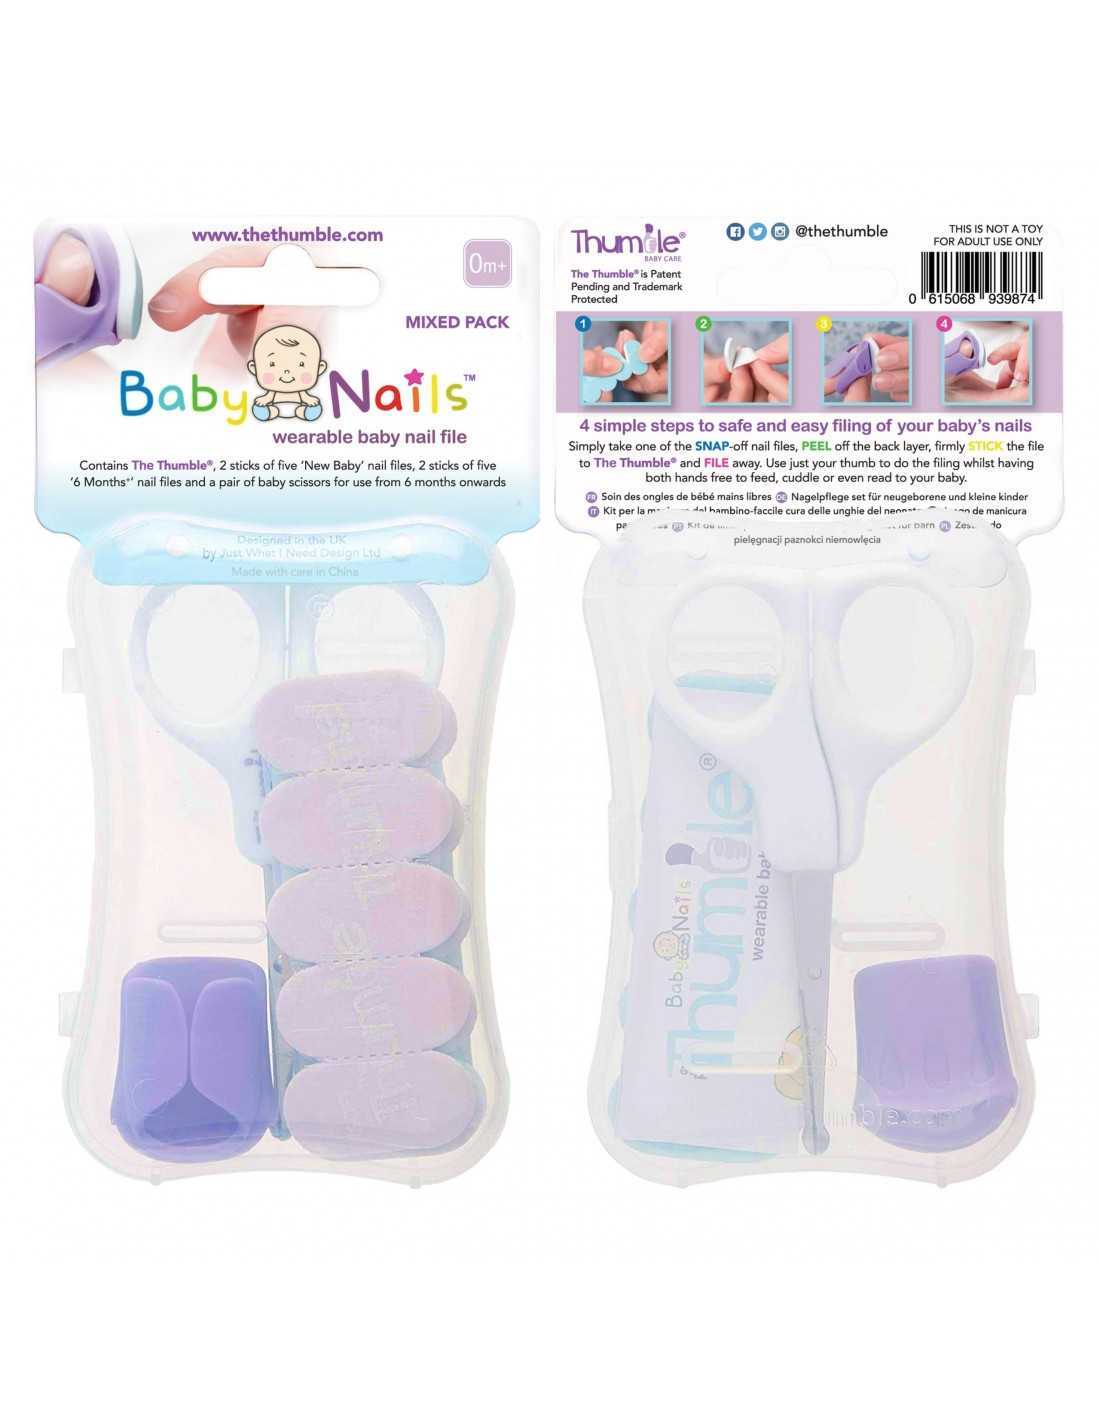 Sai Globe Two Piece Nail Filler(Set of 2) - Price in India, Buy Sai Globe  Two Piece Nail Filler(Set of 2) Online In India, Reviews, Ratings &  Features | Flipkart.com